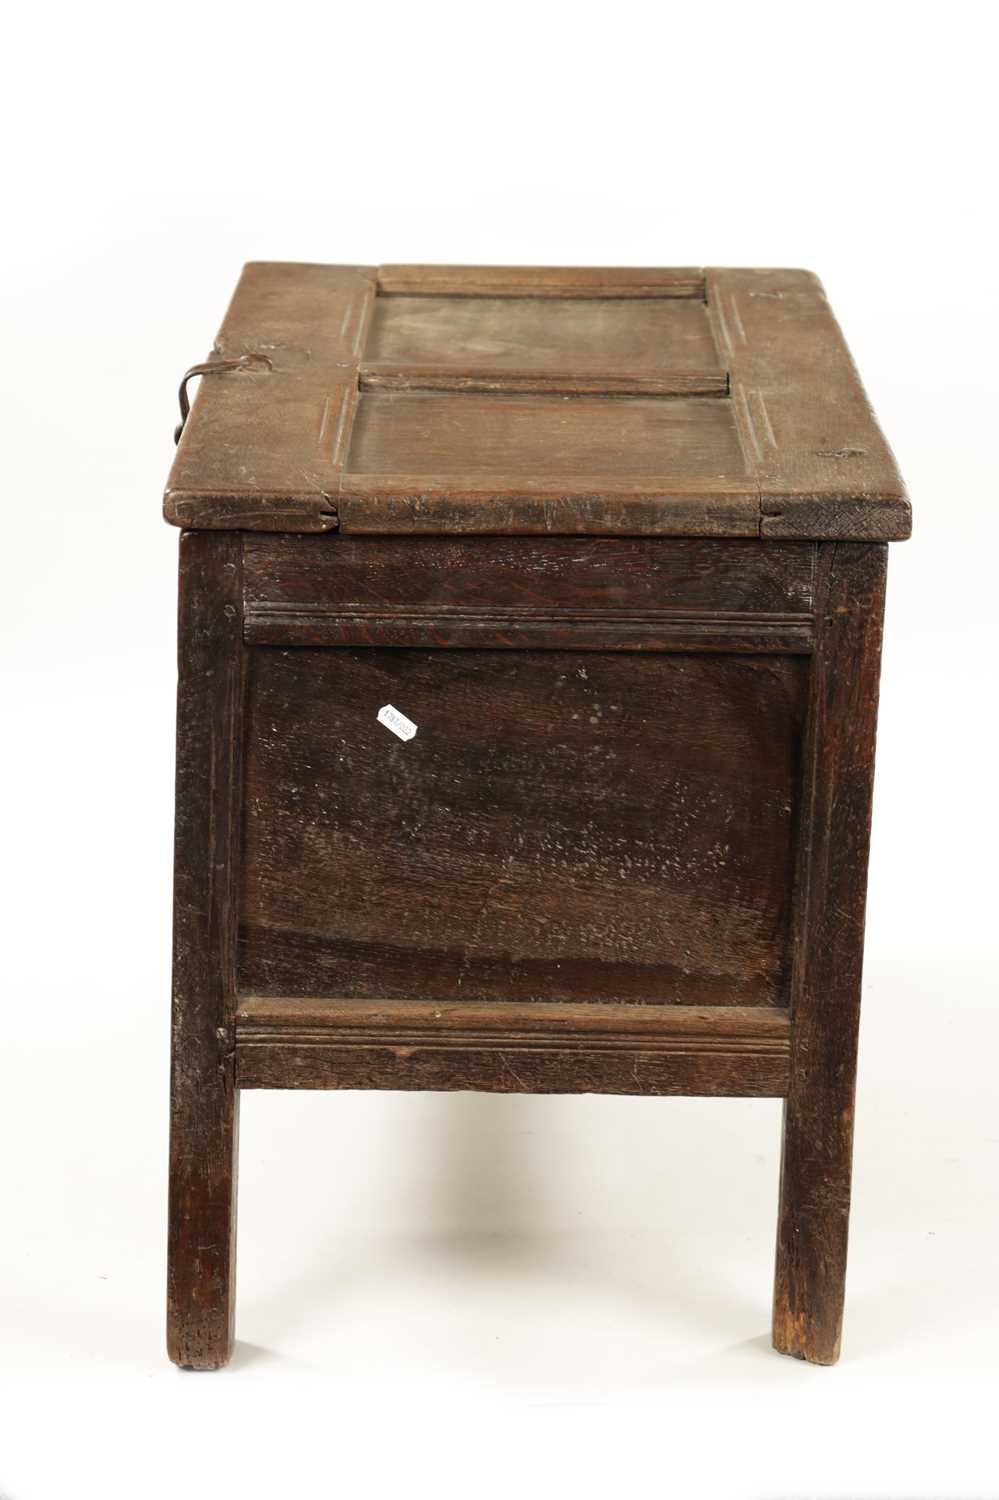 A GOOD SMALL LATE 17TH CENTURY OAK PANELLED COFFER - Image 9 of 11